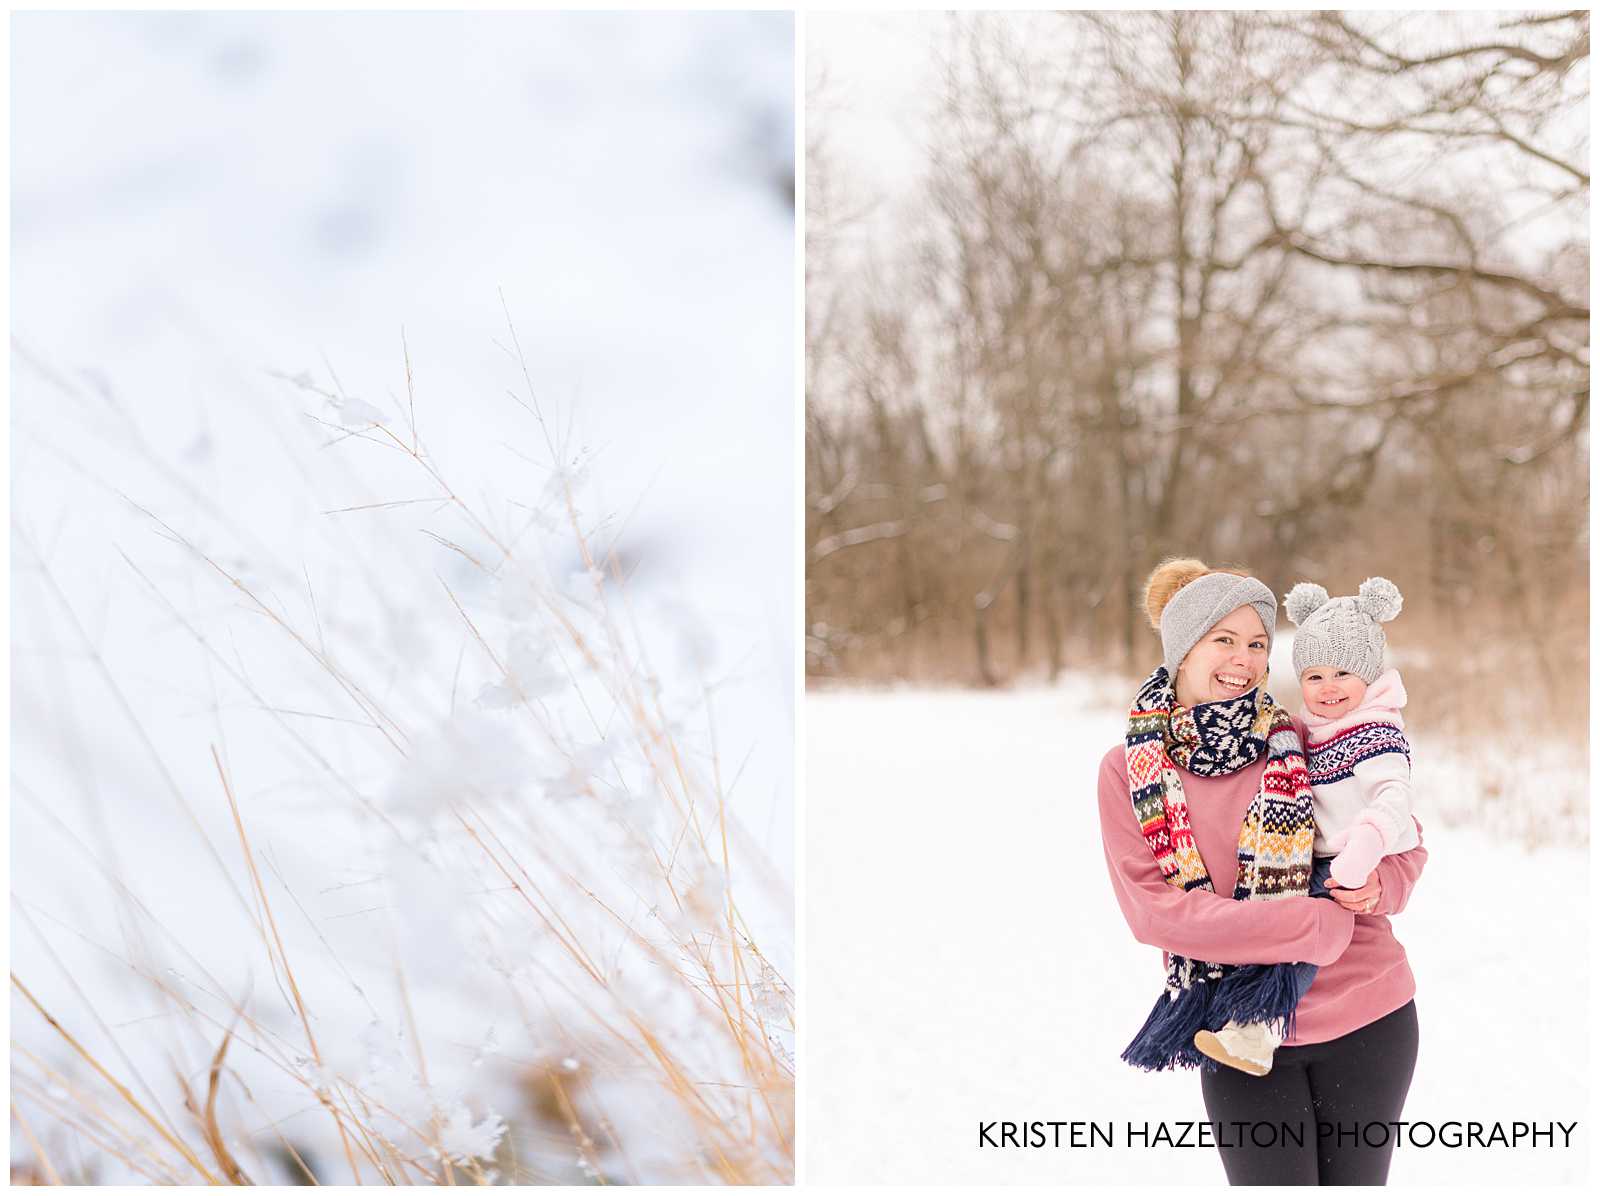 Snowy photos of a mom holding her daughter and walking along a trail in the woods